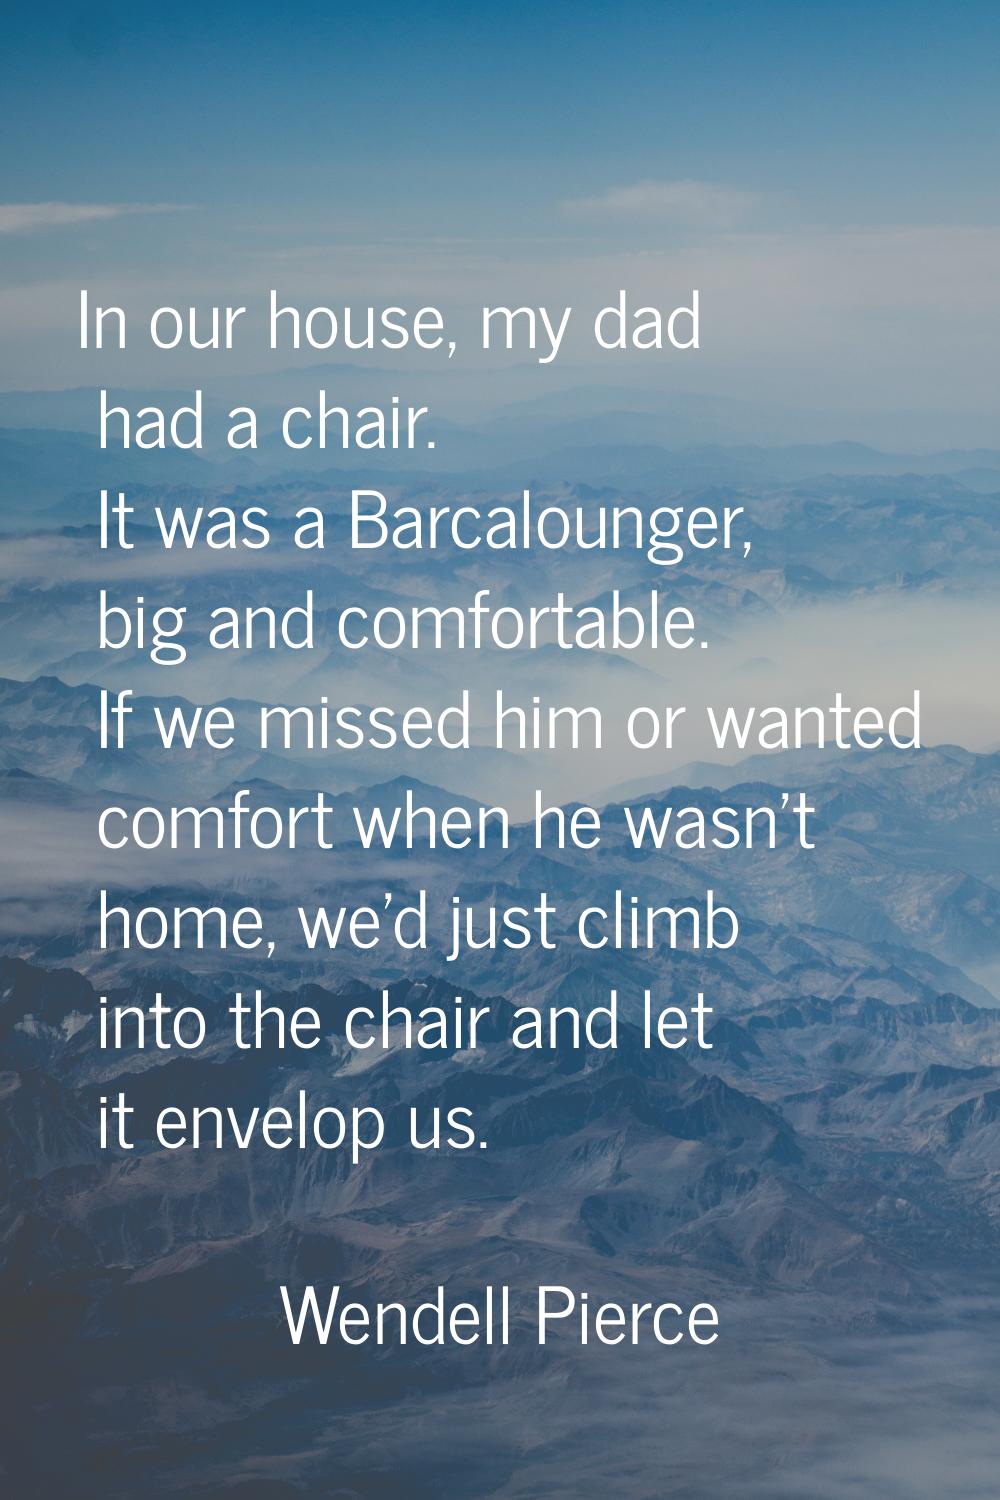 In our house, my dad had a chair. It was a Barcalounger, big and comfortable. If we missed him or w